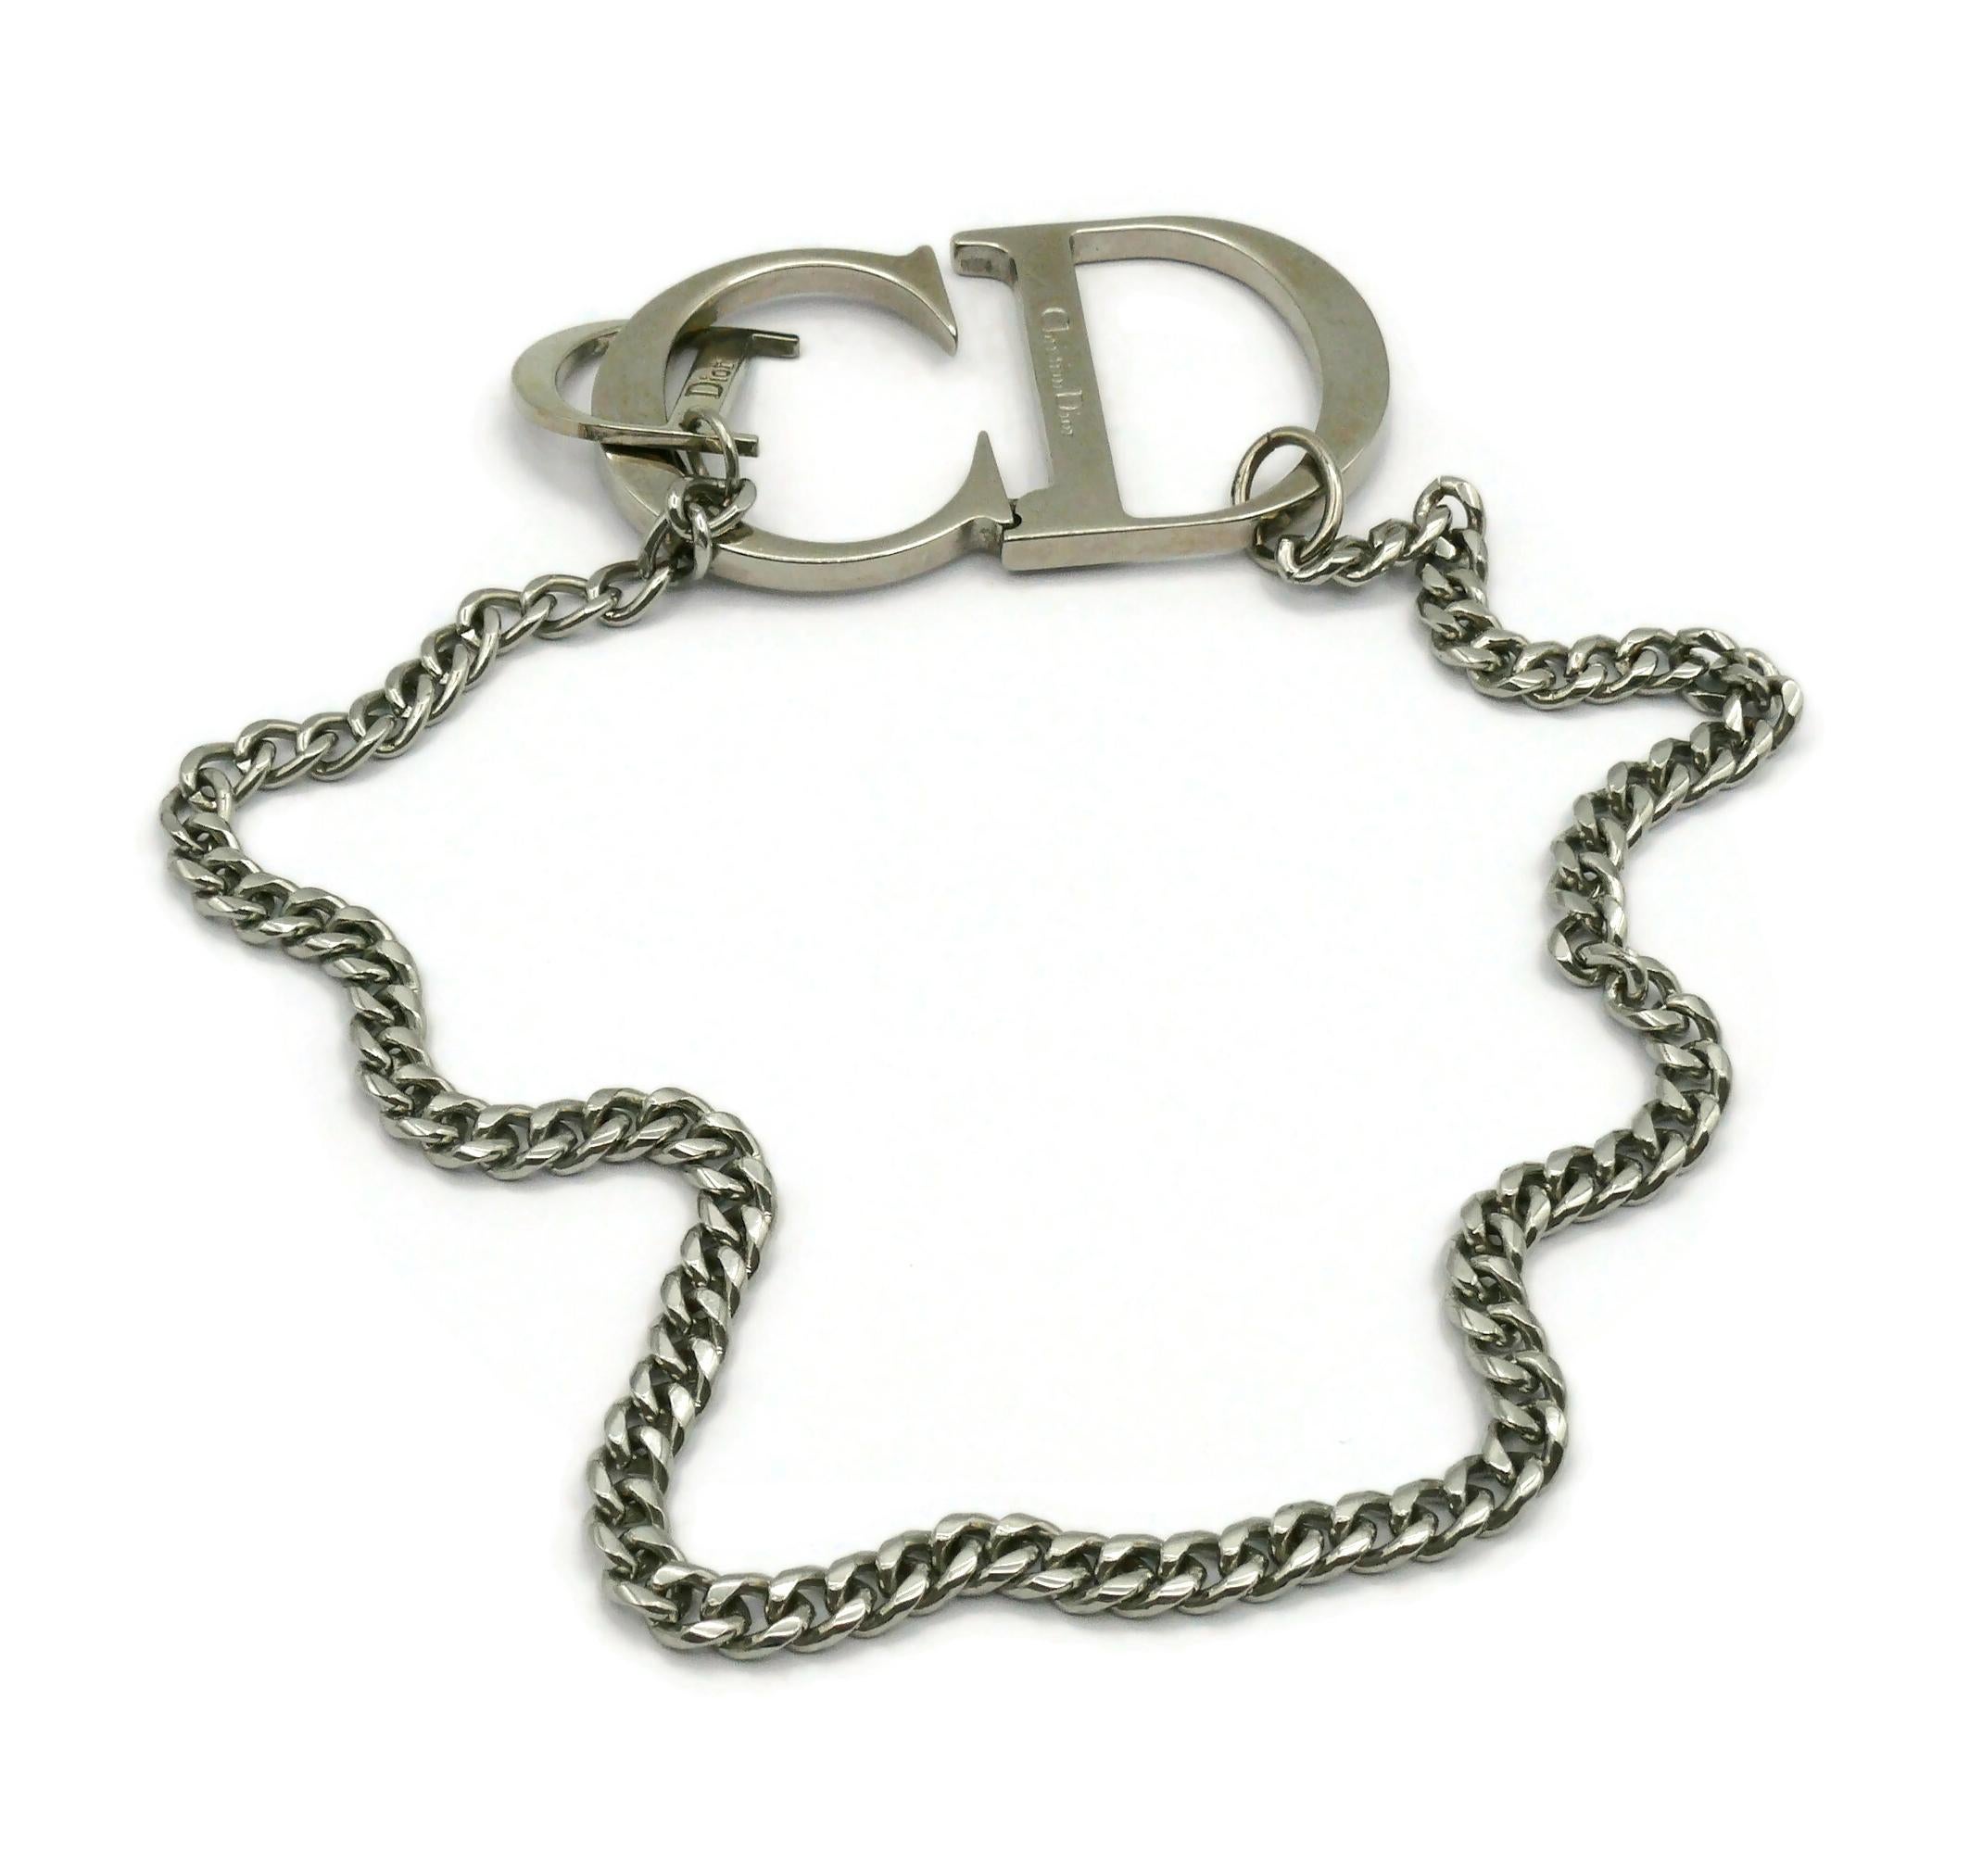 CHRISTIAND DIOR by JOHN GALLIANO Silver Tone CD Chain Necklace In Good Condition For Sale In Nice, FR